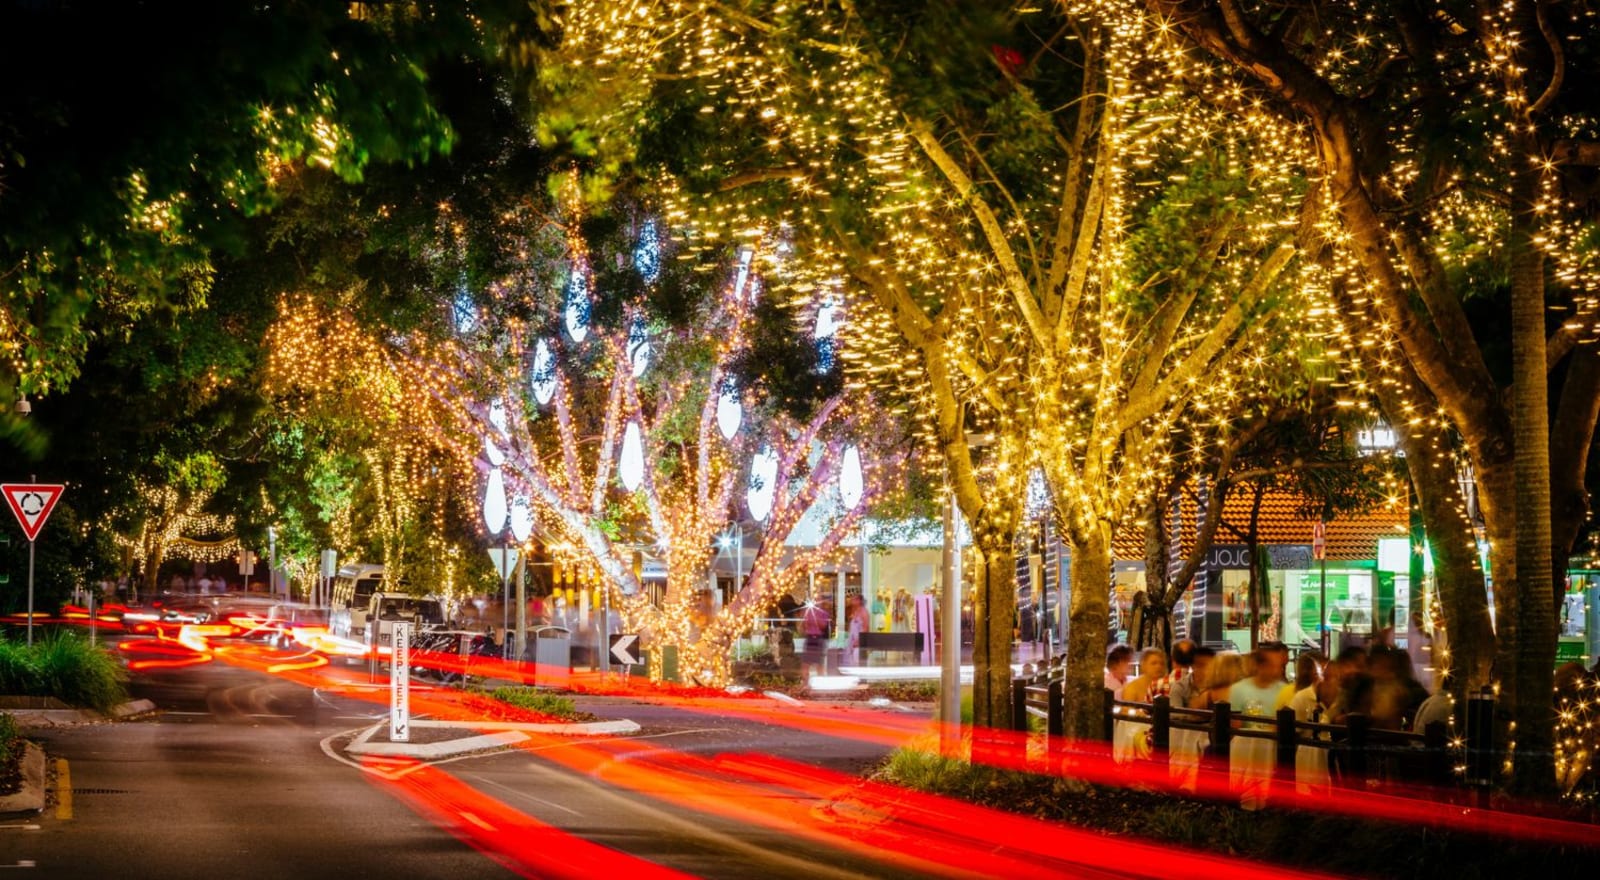 noosa street at night with trees covered in lights 